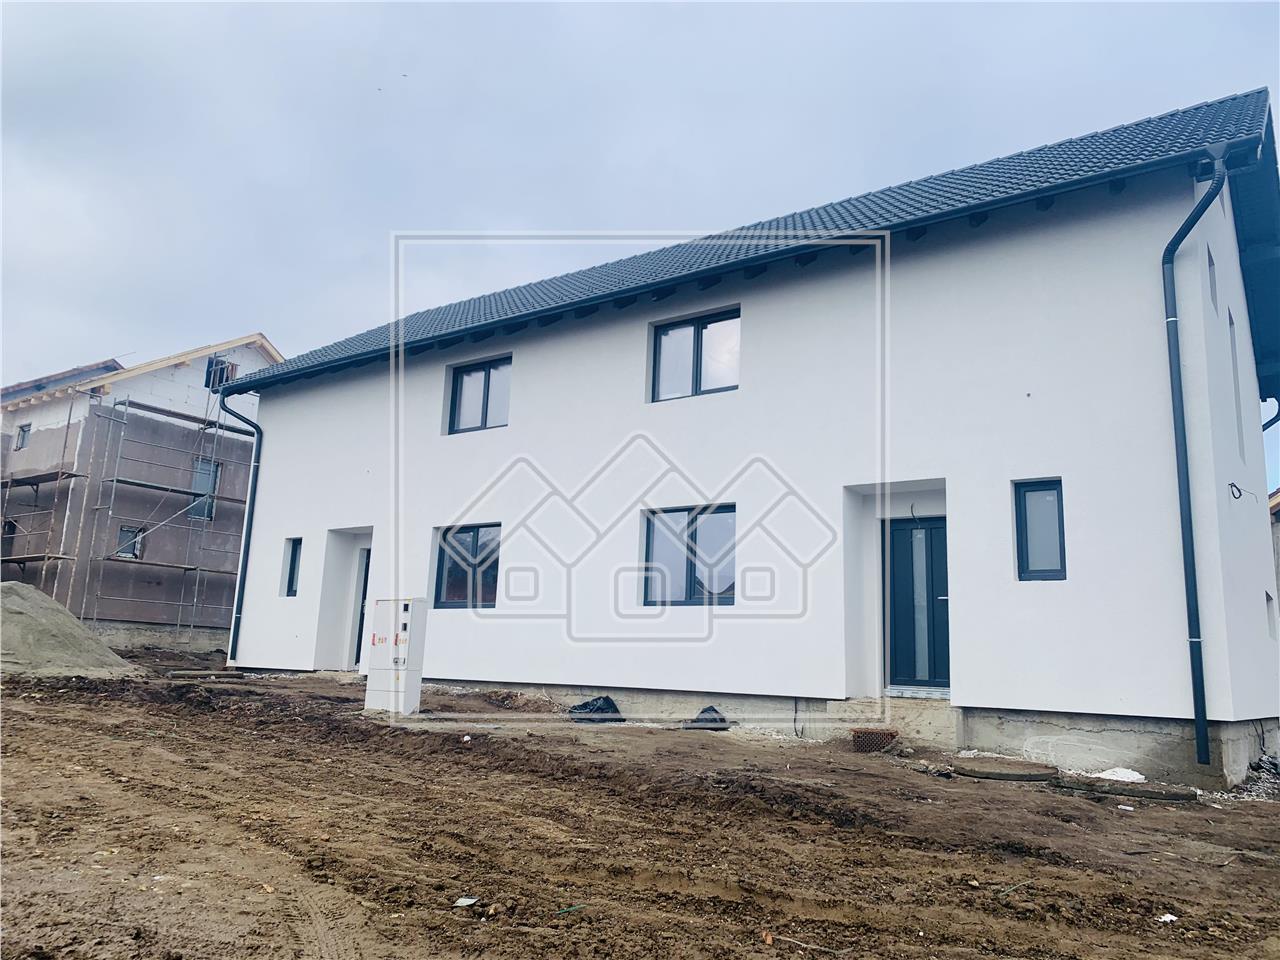 House for sale in Sibiu - duplex - with land and garage